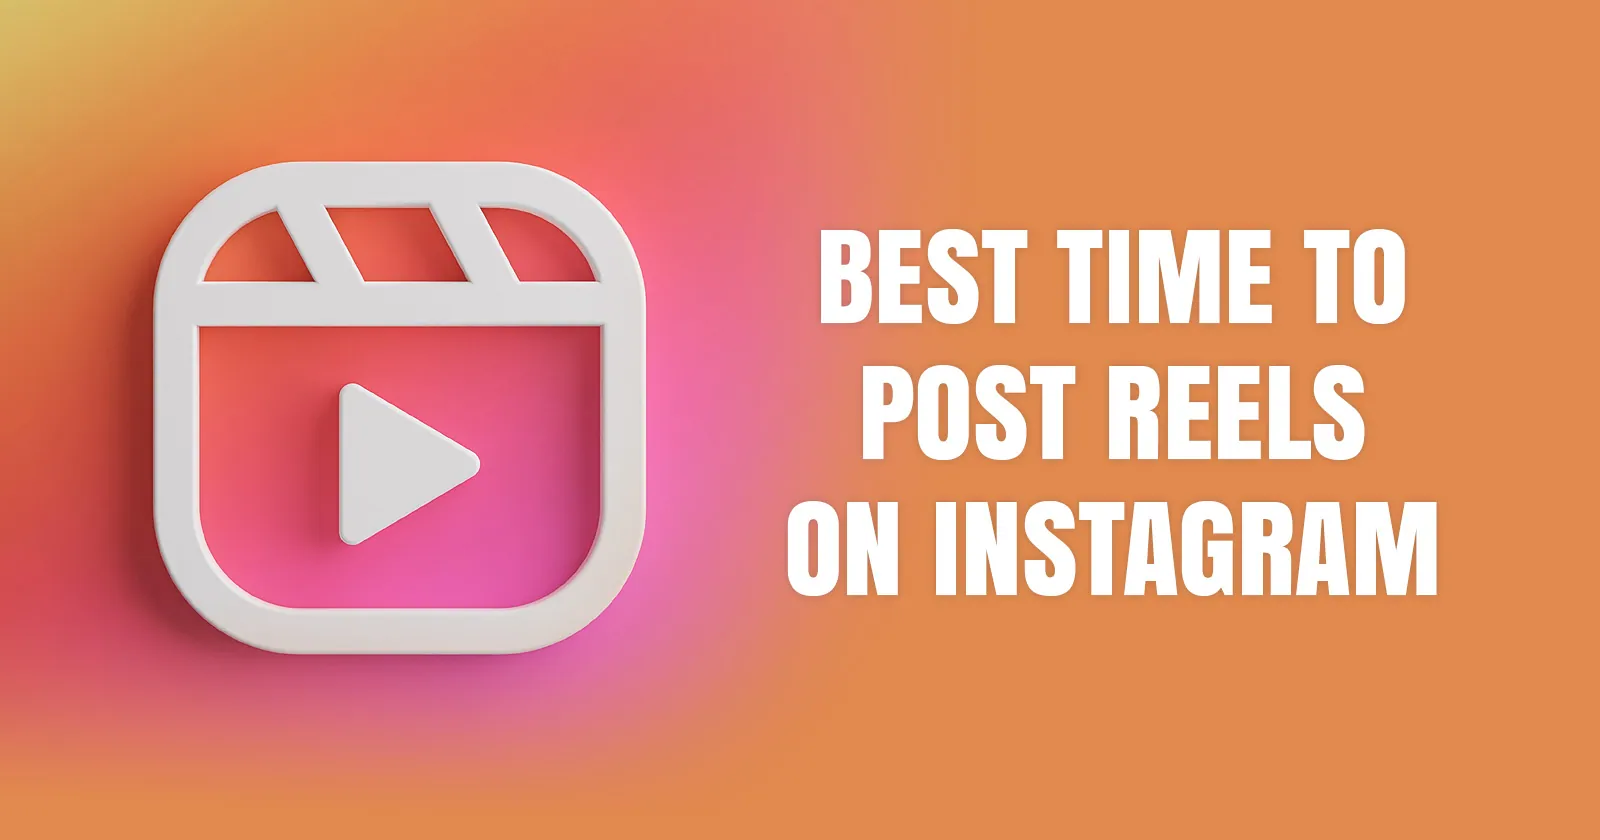 What Time is Best to Post Reels on Instagram?